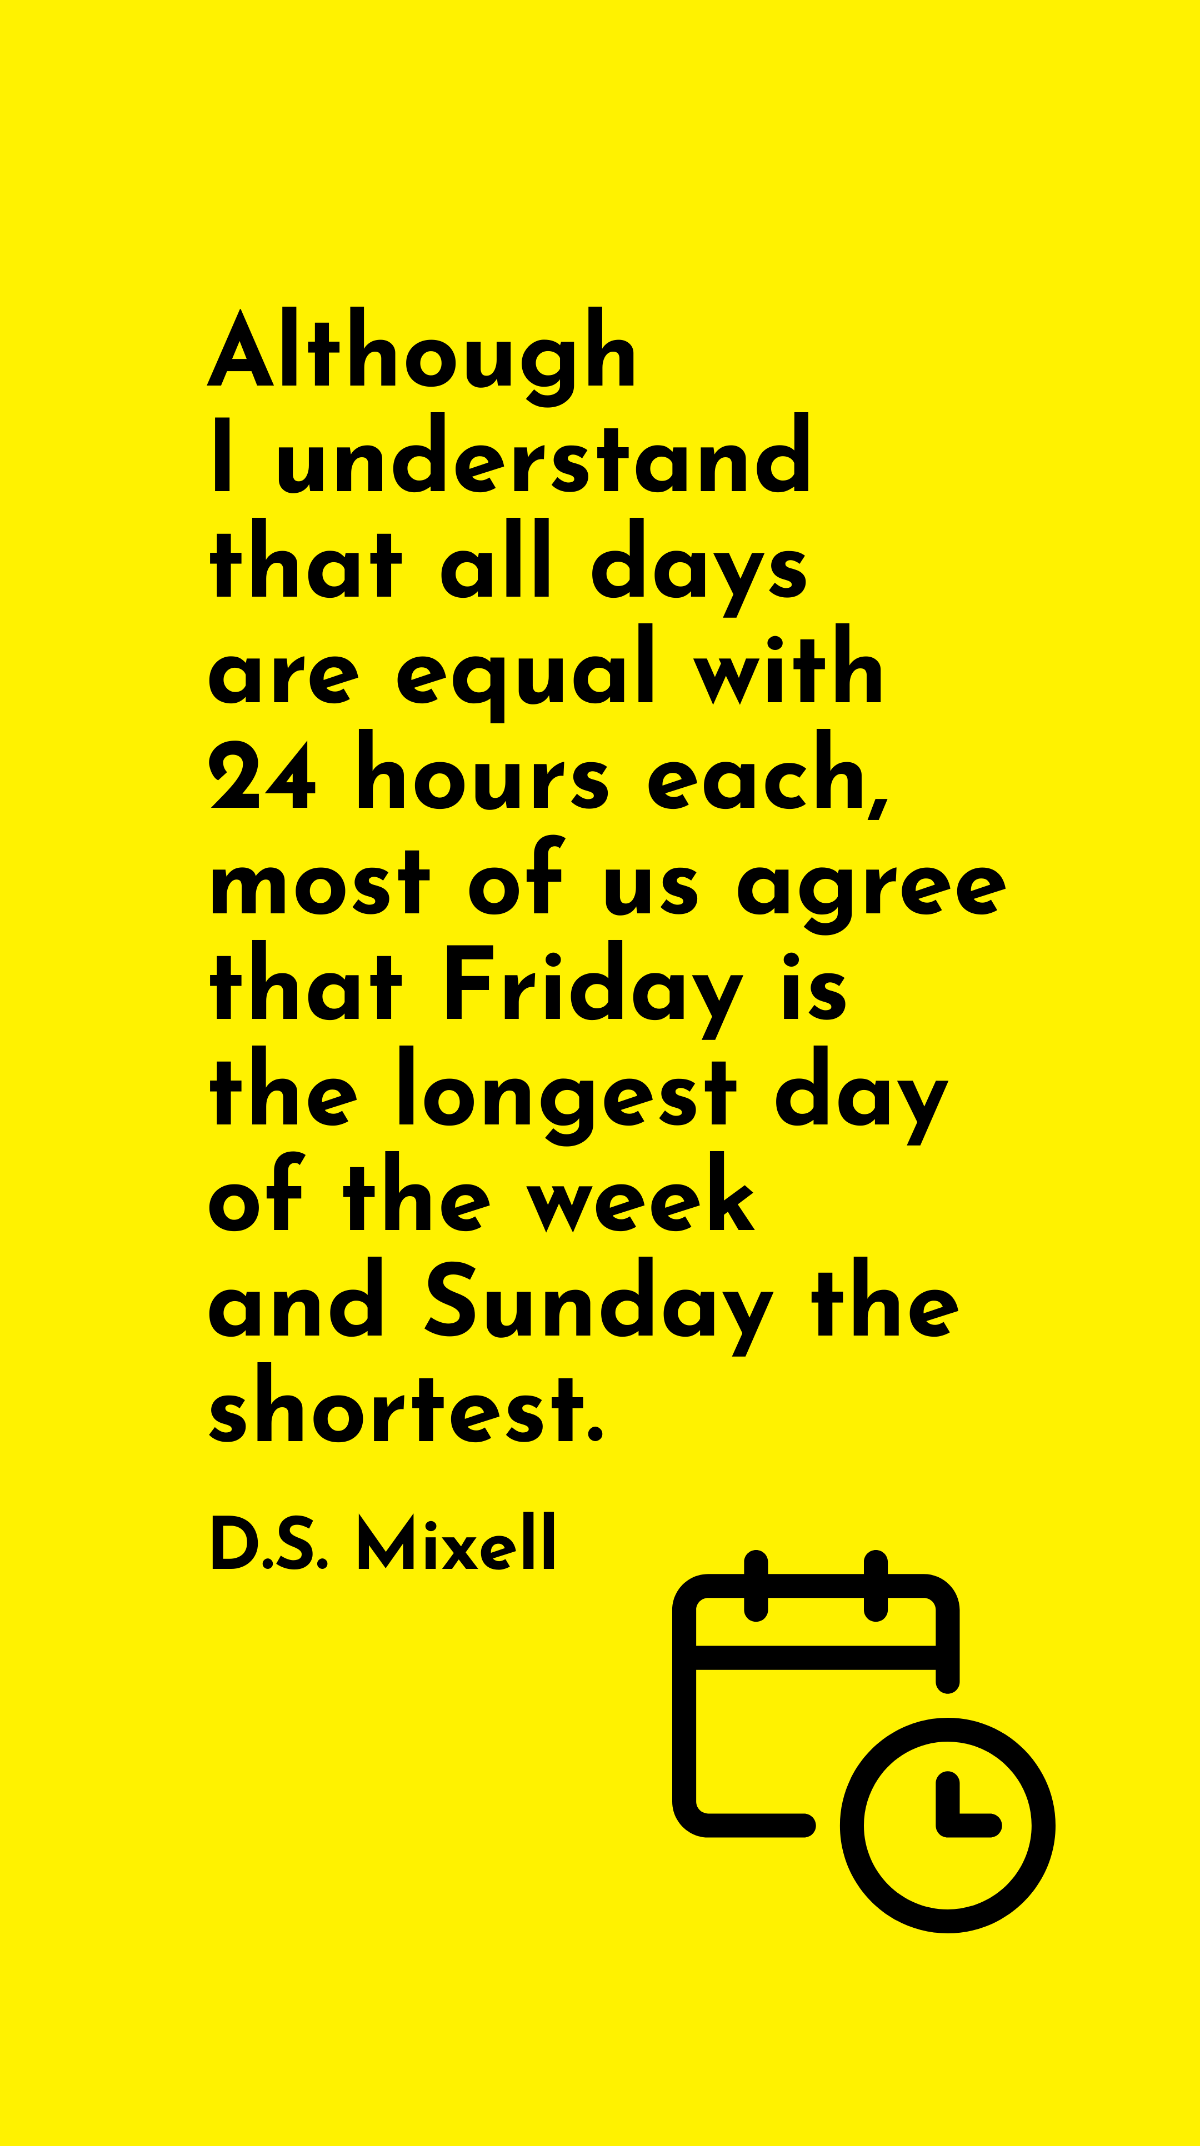 D.S. Mixell - Although I understand that all days are equal with 24 hours each, most of us agree that Friday is the longest day of the week and Sunday the shortest.